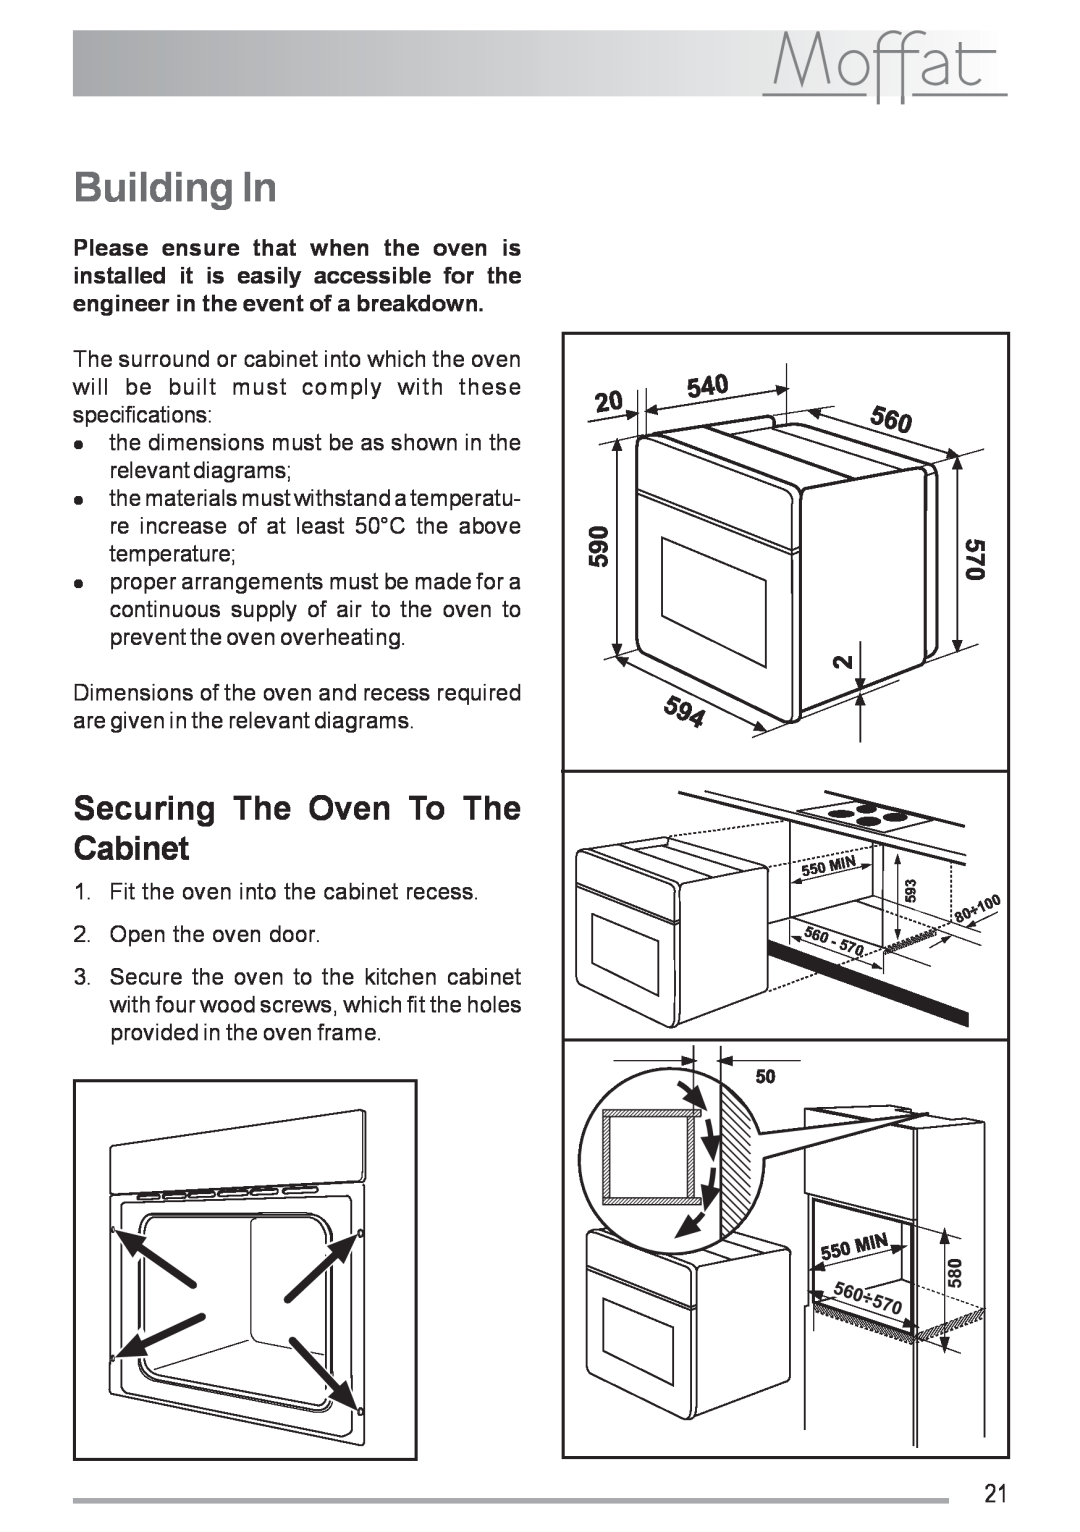 Moffat MSF 616 manual Building In, Securing The Oven To The Cabinet 